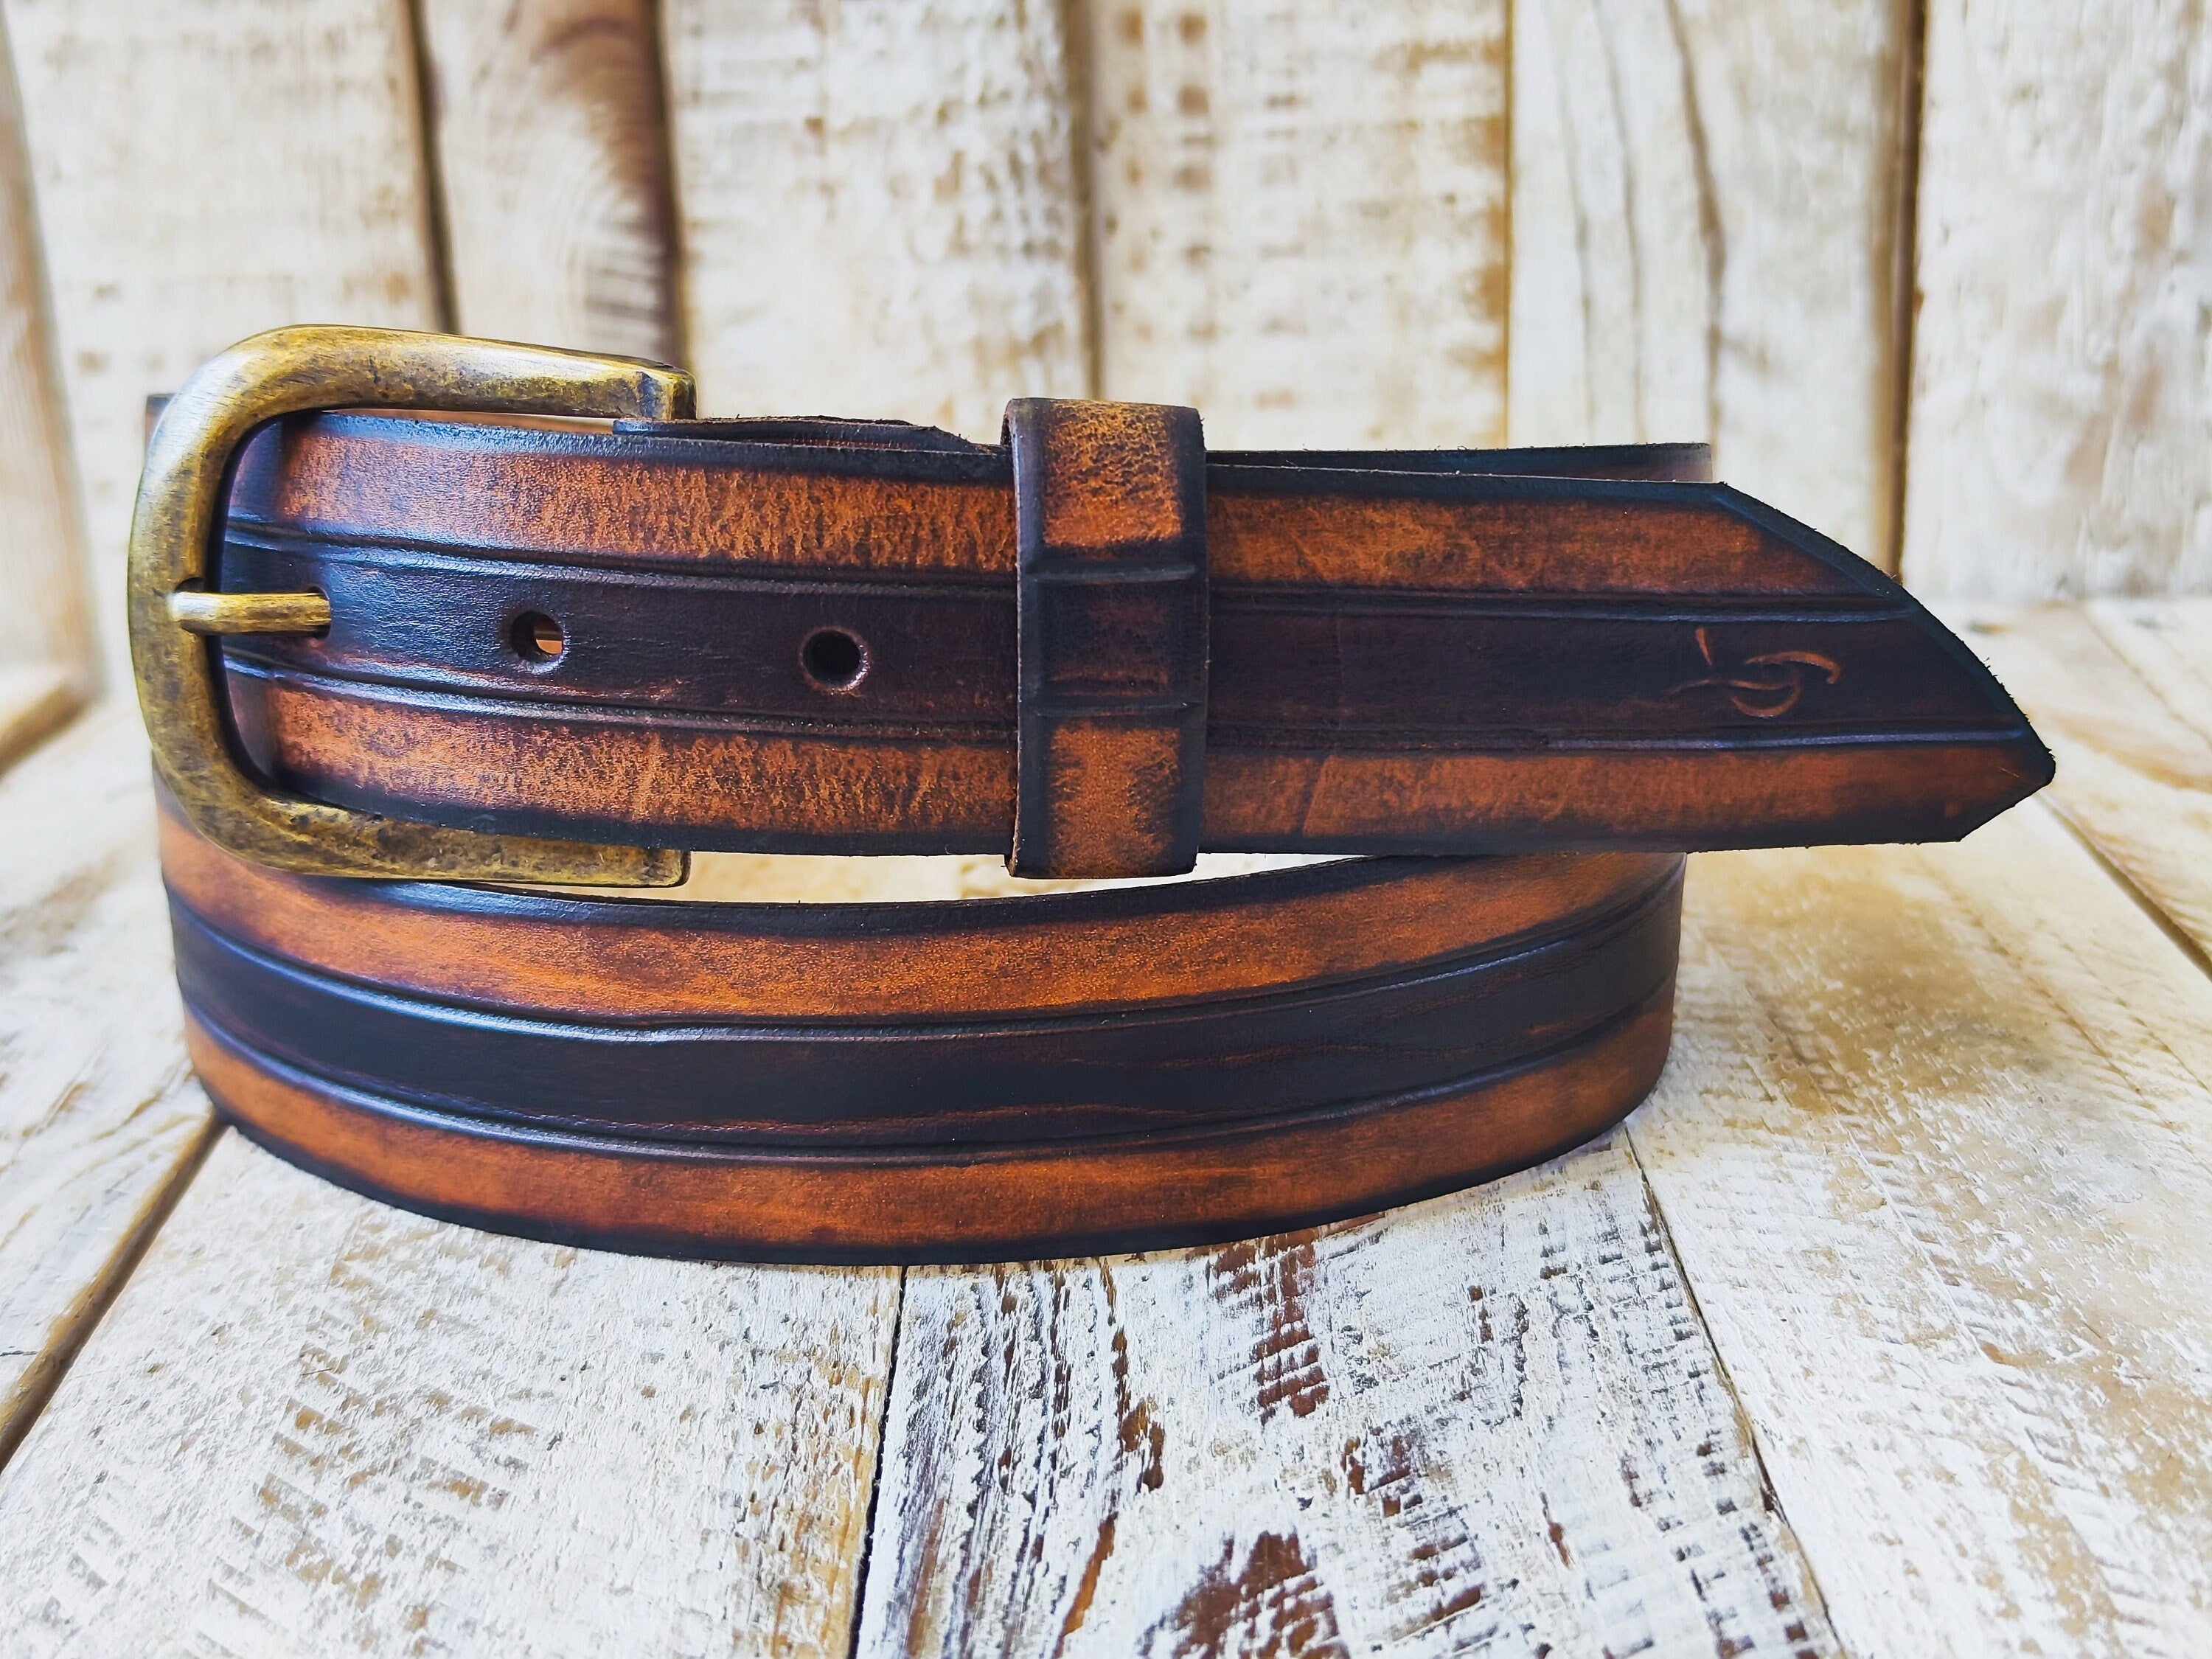 Handcrafted Leather Belt with three stripes in shades of brown and bronze Removable Buckle